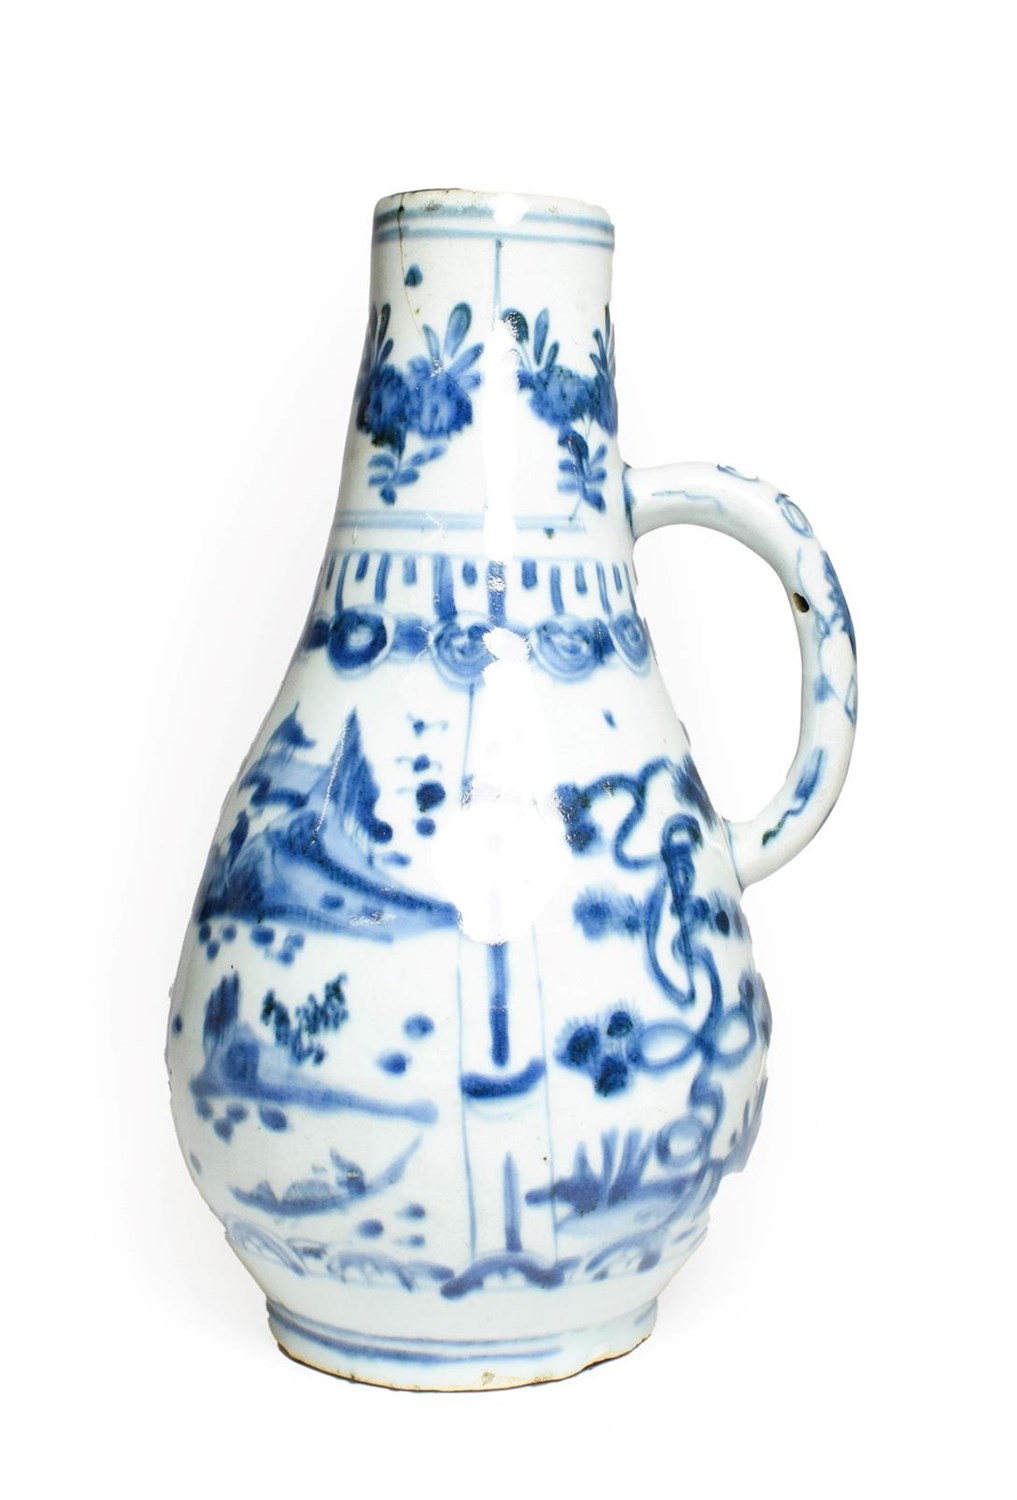 Lot 68 - A Kraak Porcelain Ewer, early 17th century, of pear shape with loop handle, typically painted...